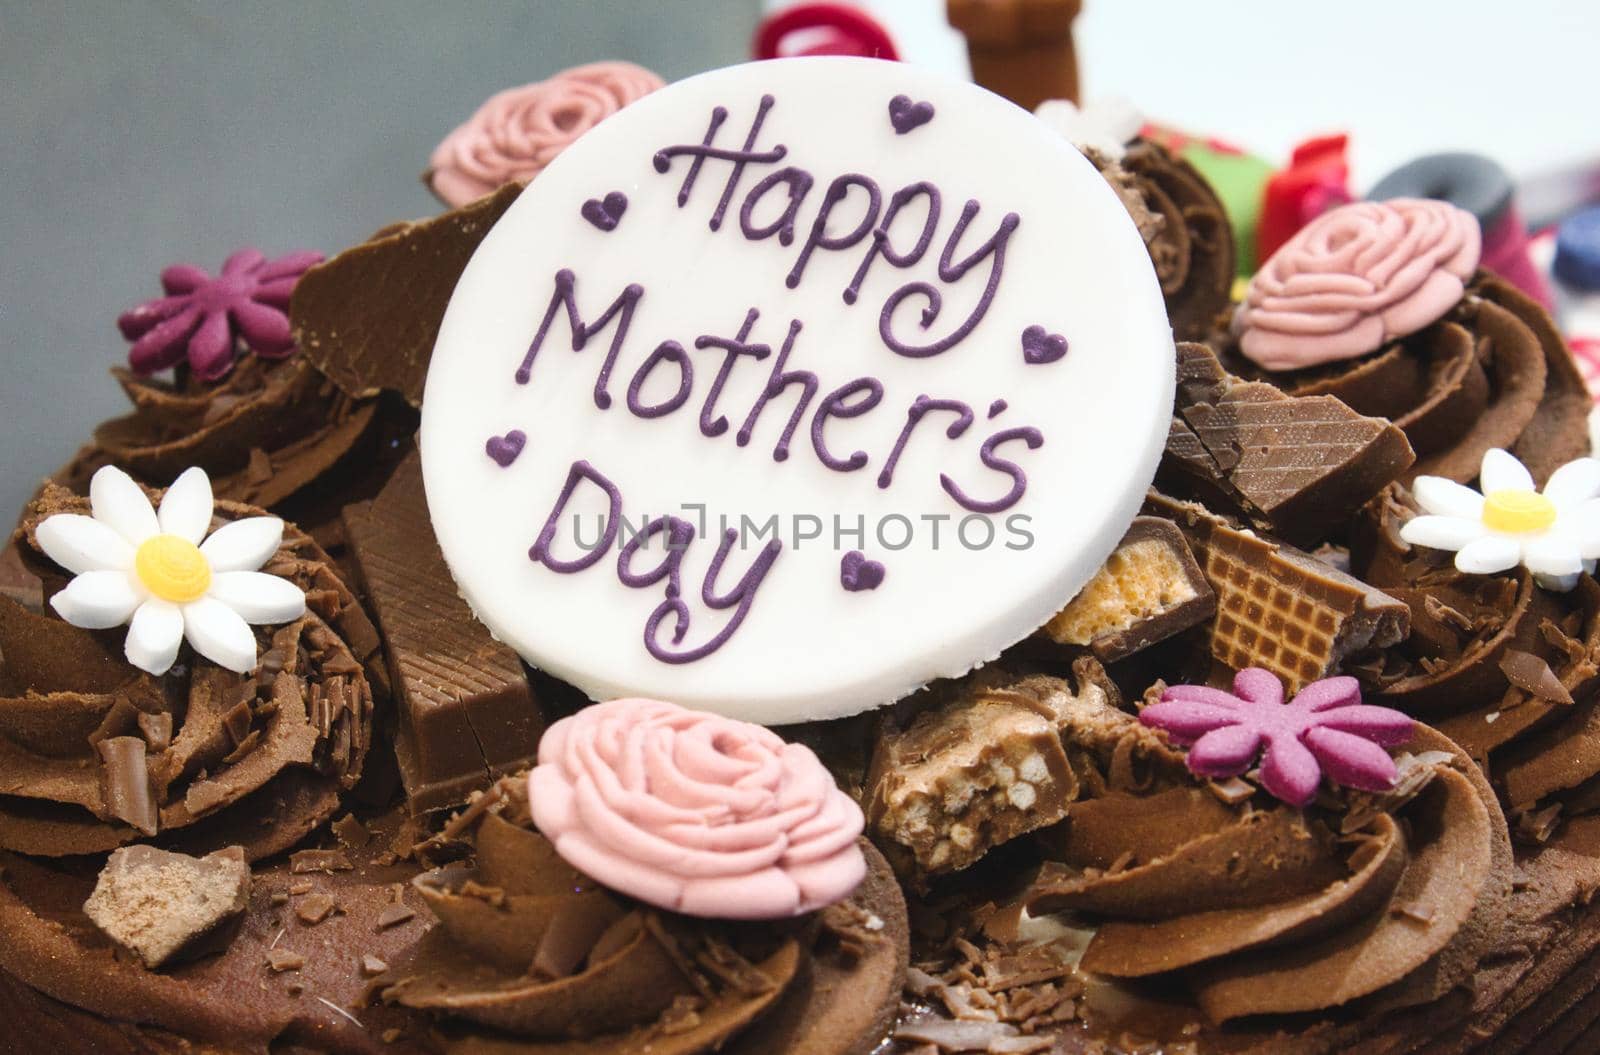 Happy Mother's Day cake with chocolate and marzipan icing